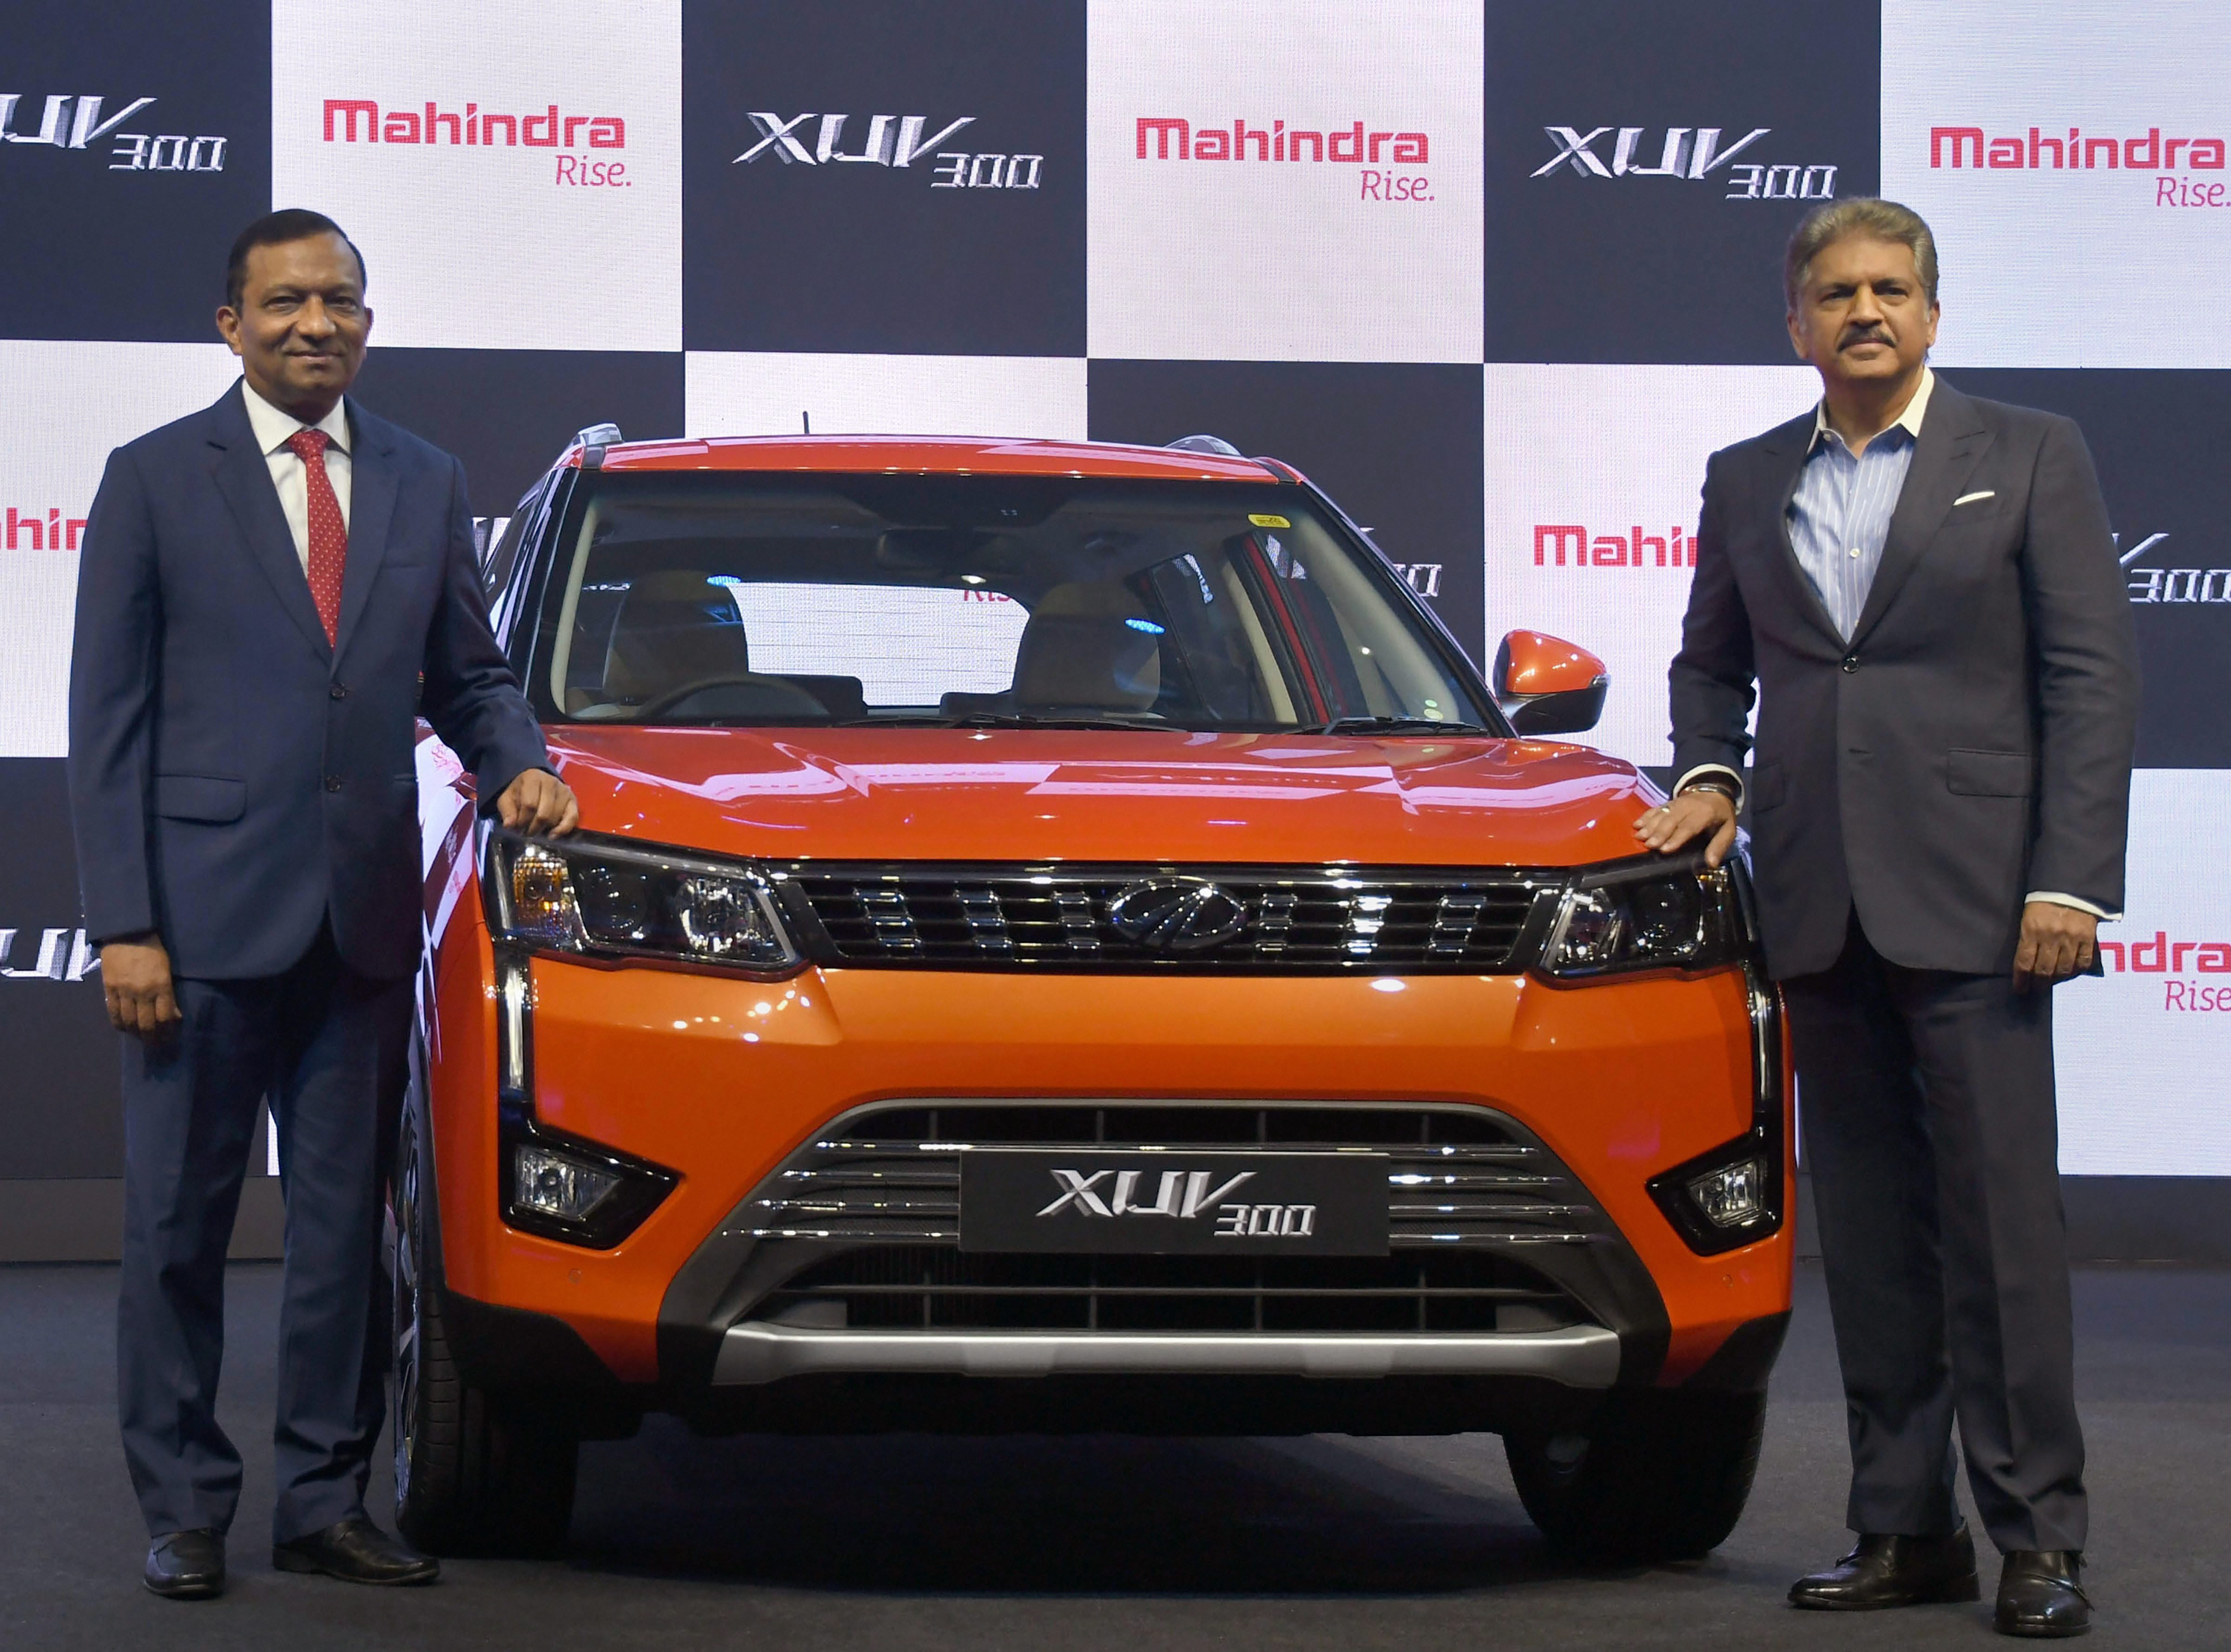 Mahindra plans to launch fully-electric version of this SUV next year